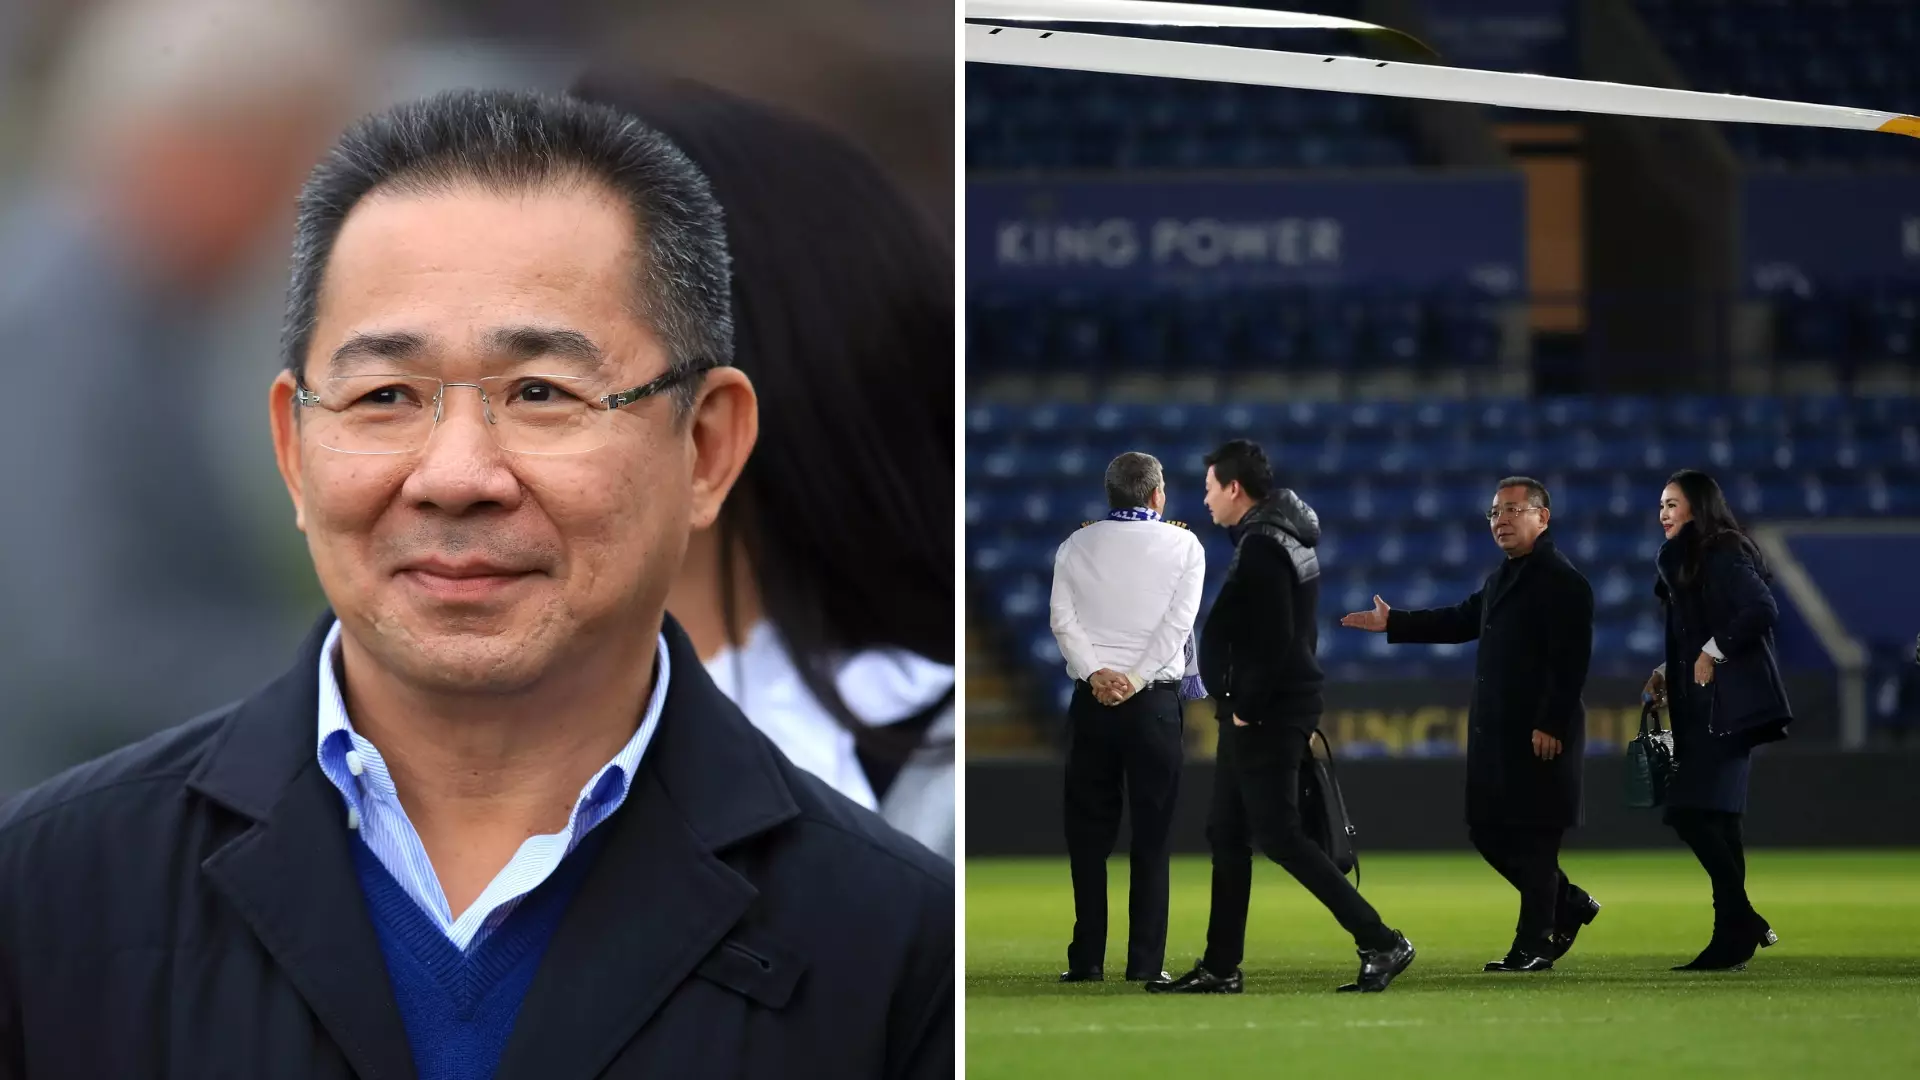 Leicester City Owner Vichai Srivaddhanaprabha ‘On Board Crashed Helicopter’